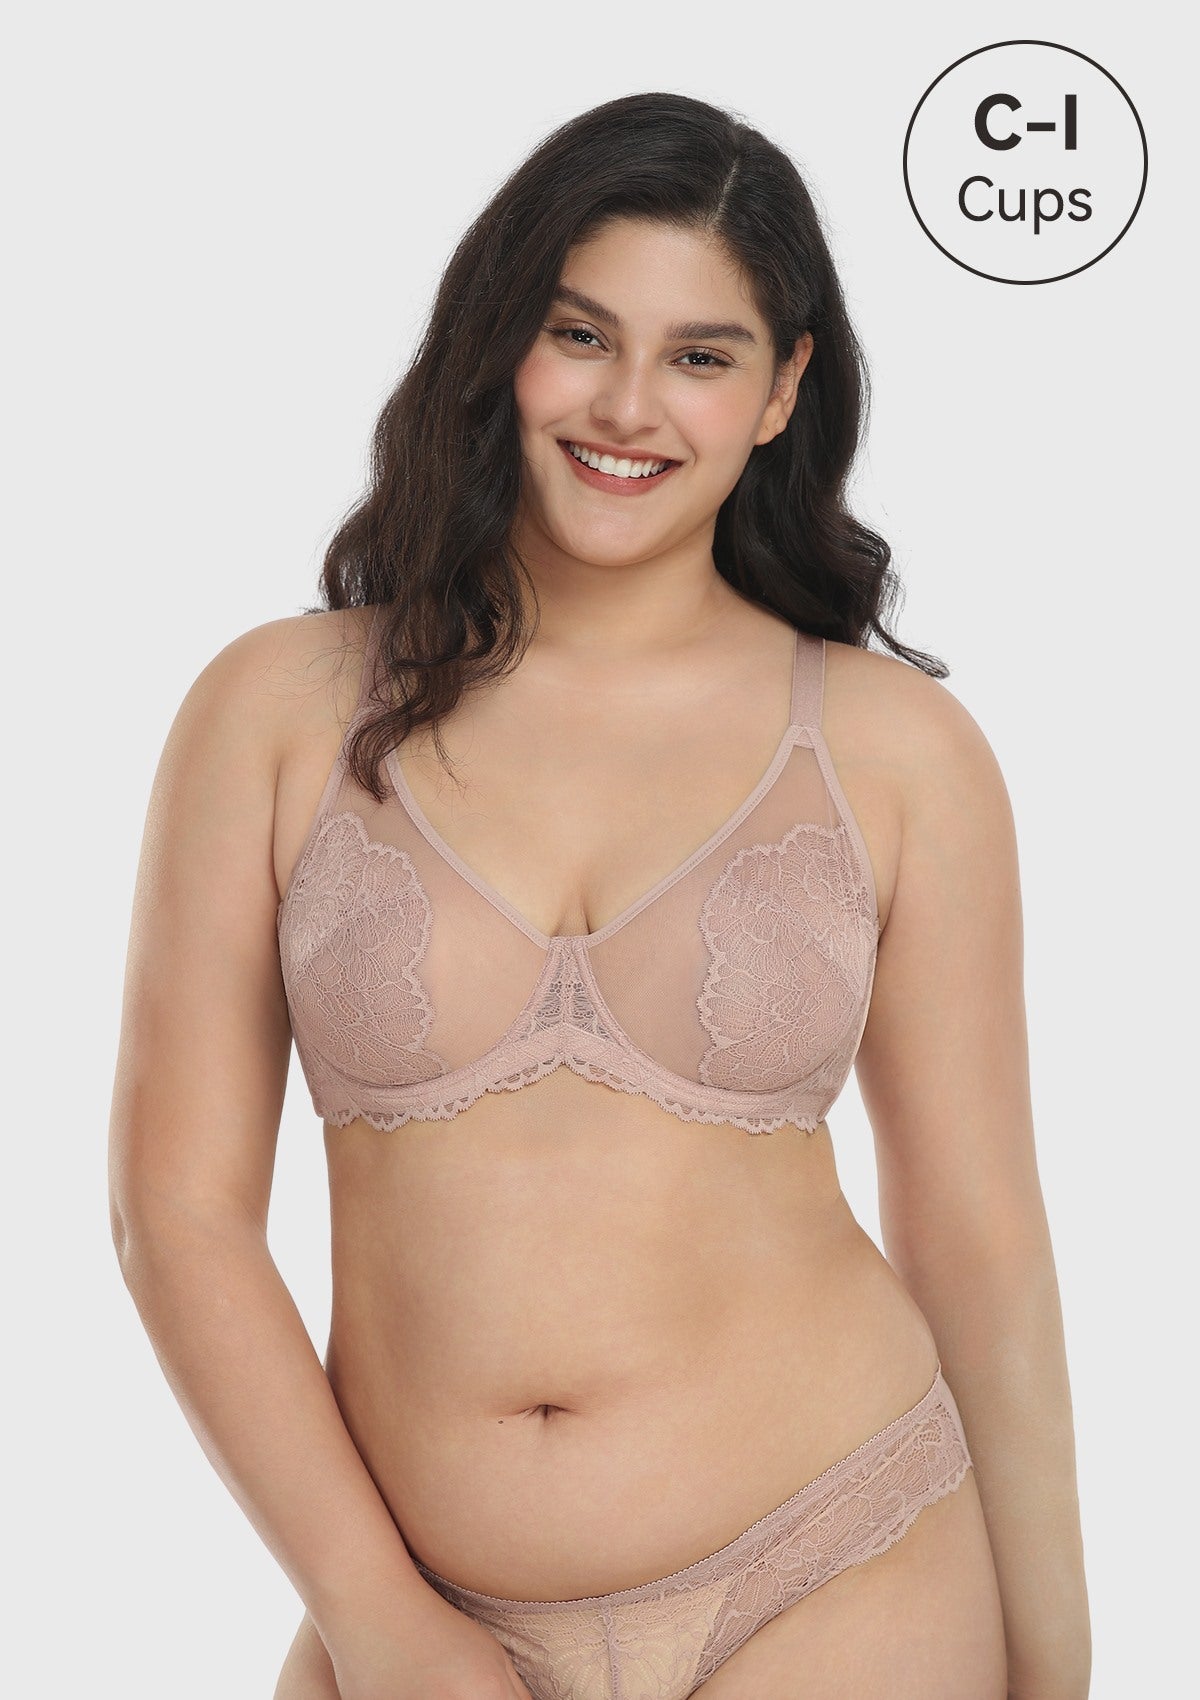 HSIA Blossom Plus Size Lace Bra - Wired, Unpadded, See-Through - Dark Pink / 44 / H